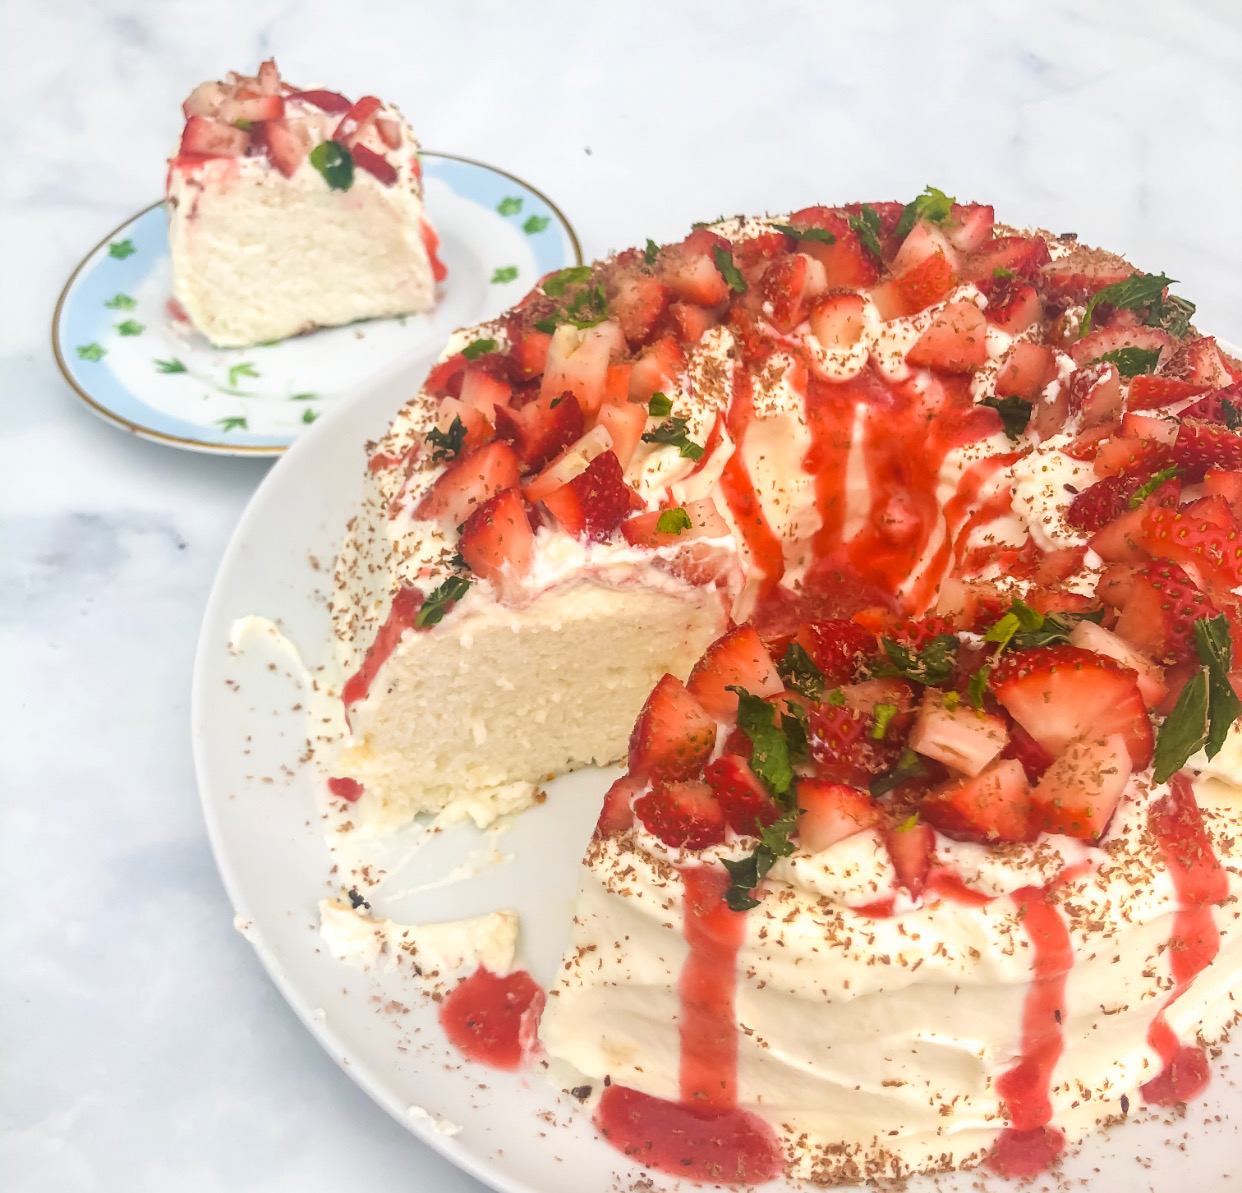 Finished gluten free angel food cake with whipped cream topped with strawberry compote, mint, and chocolate shavings